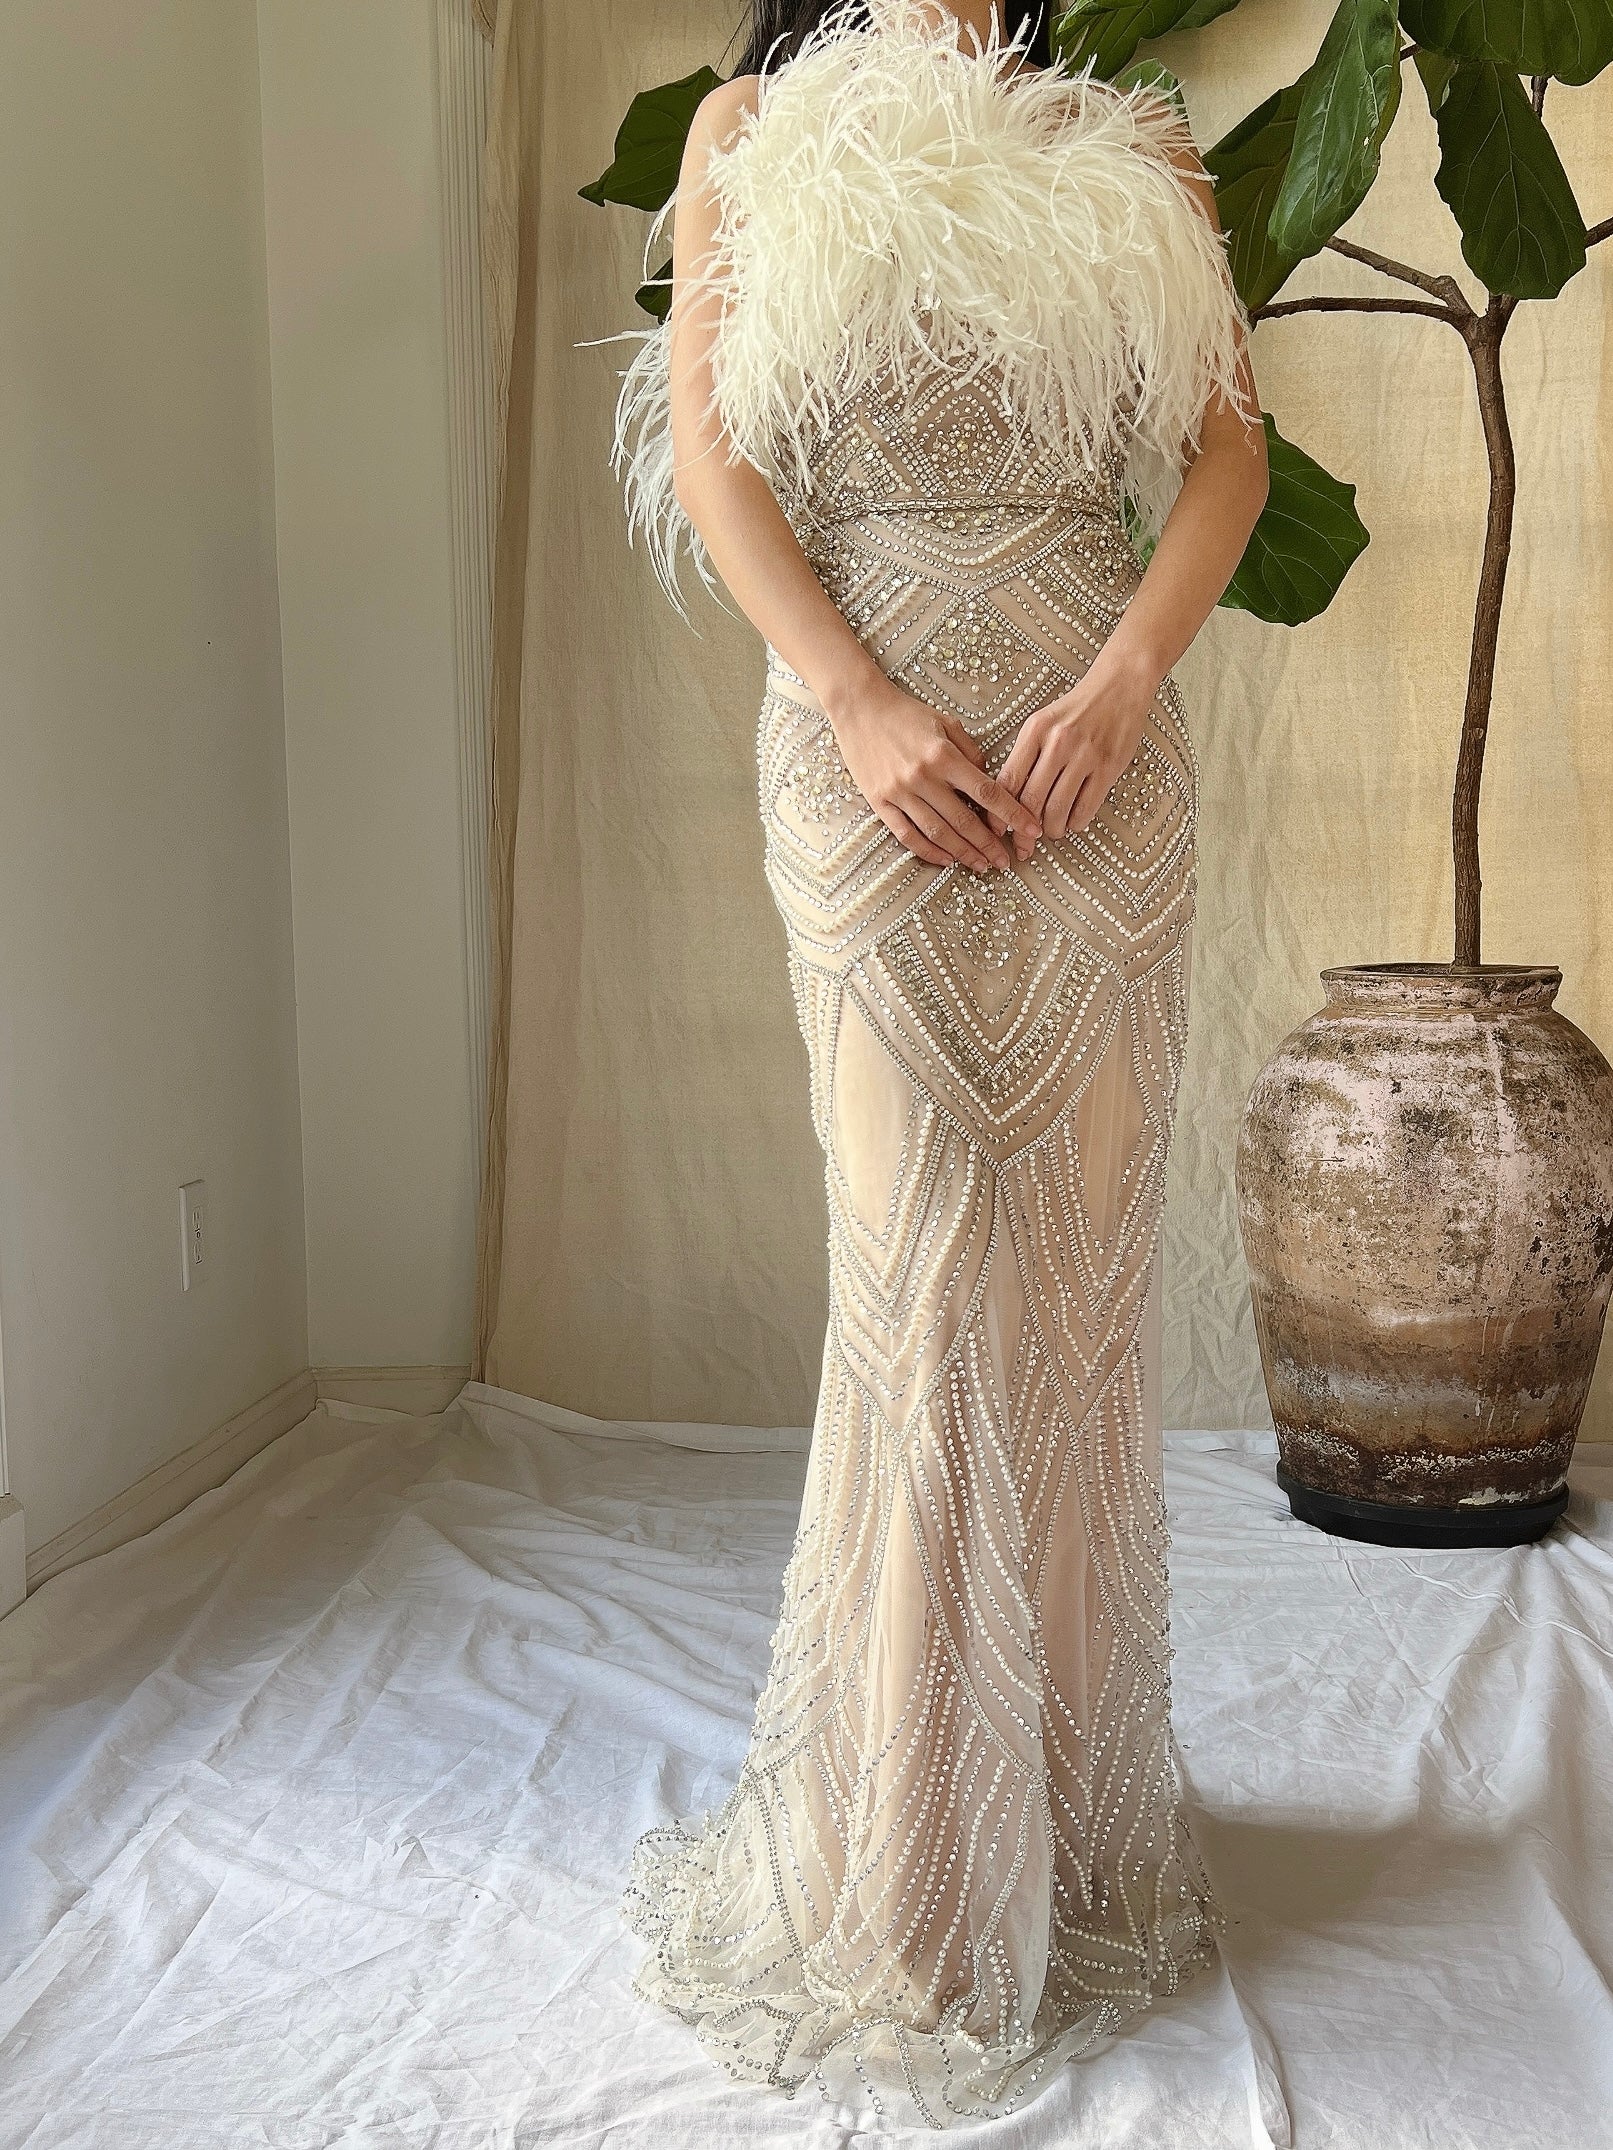 1990s Crystals Ivory/Nude Gown with Feathers - XS